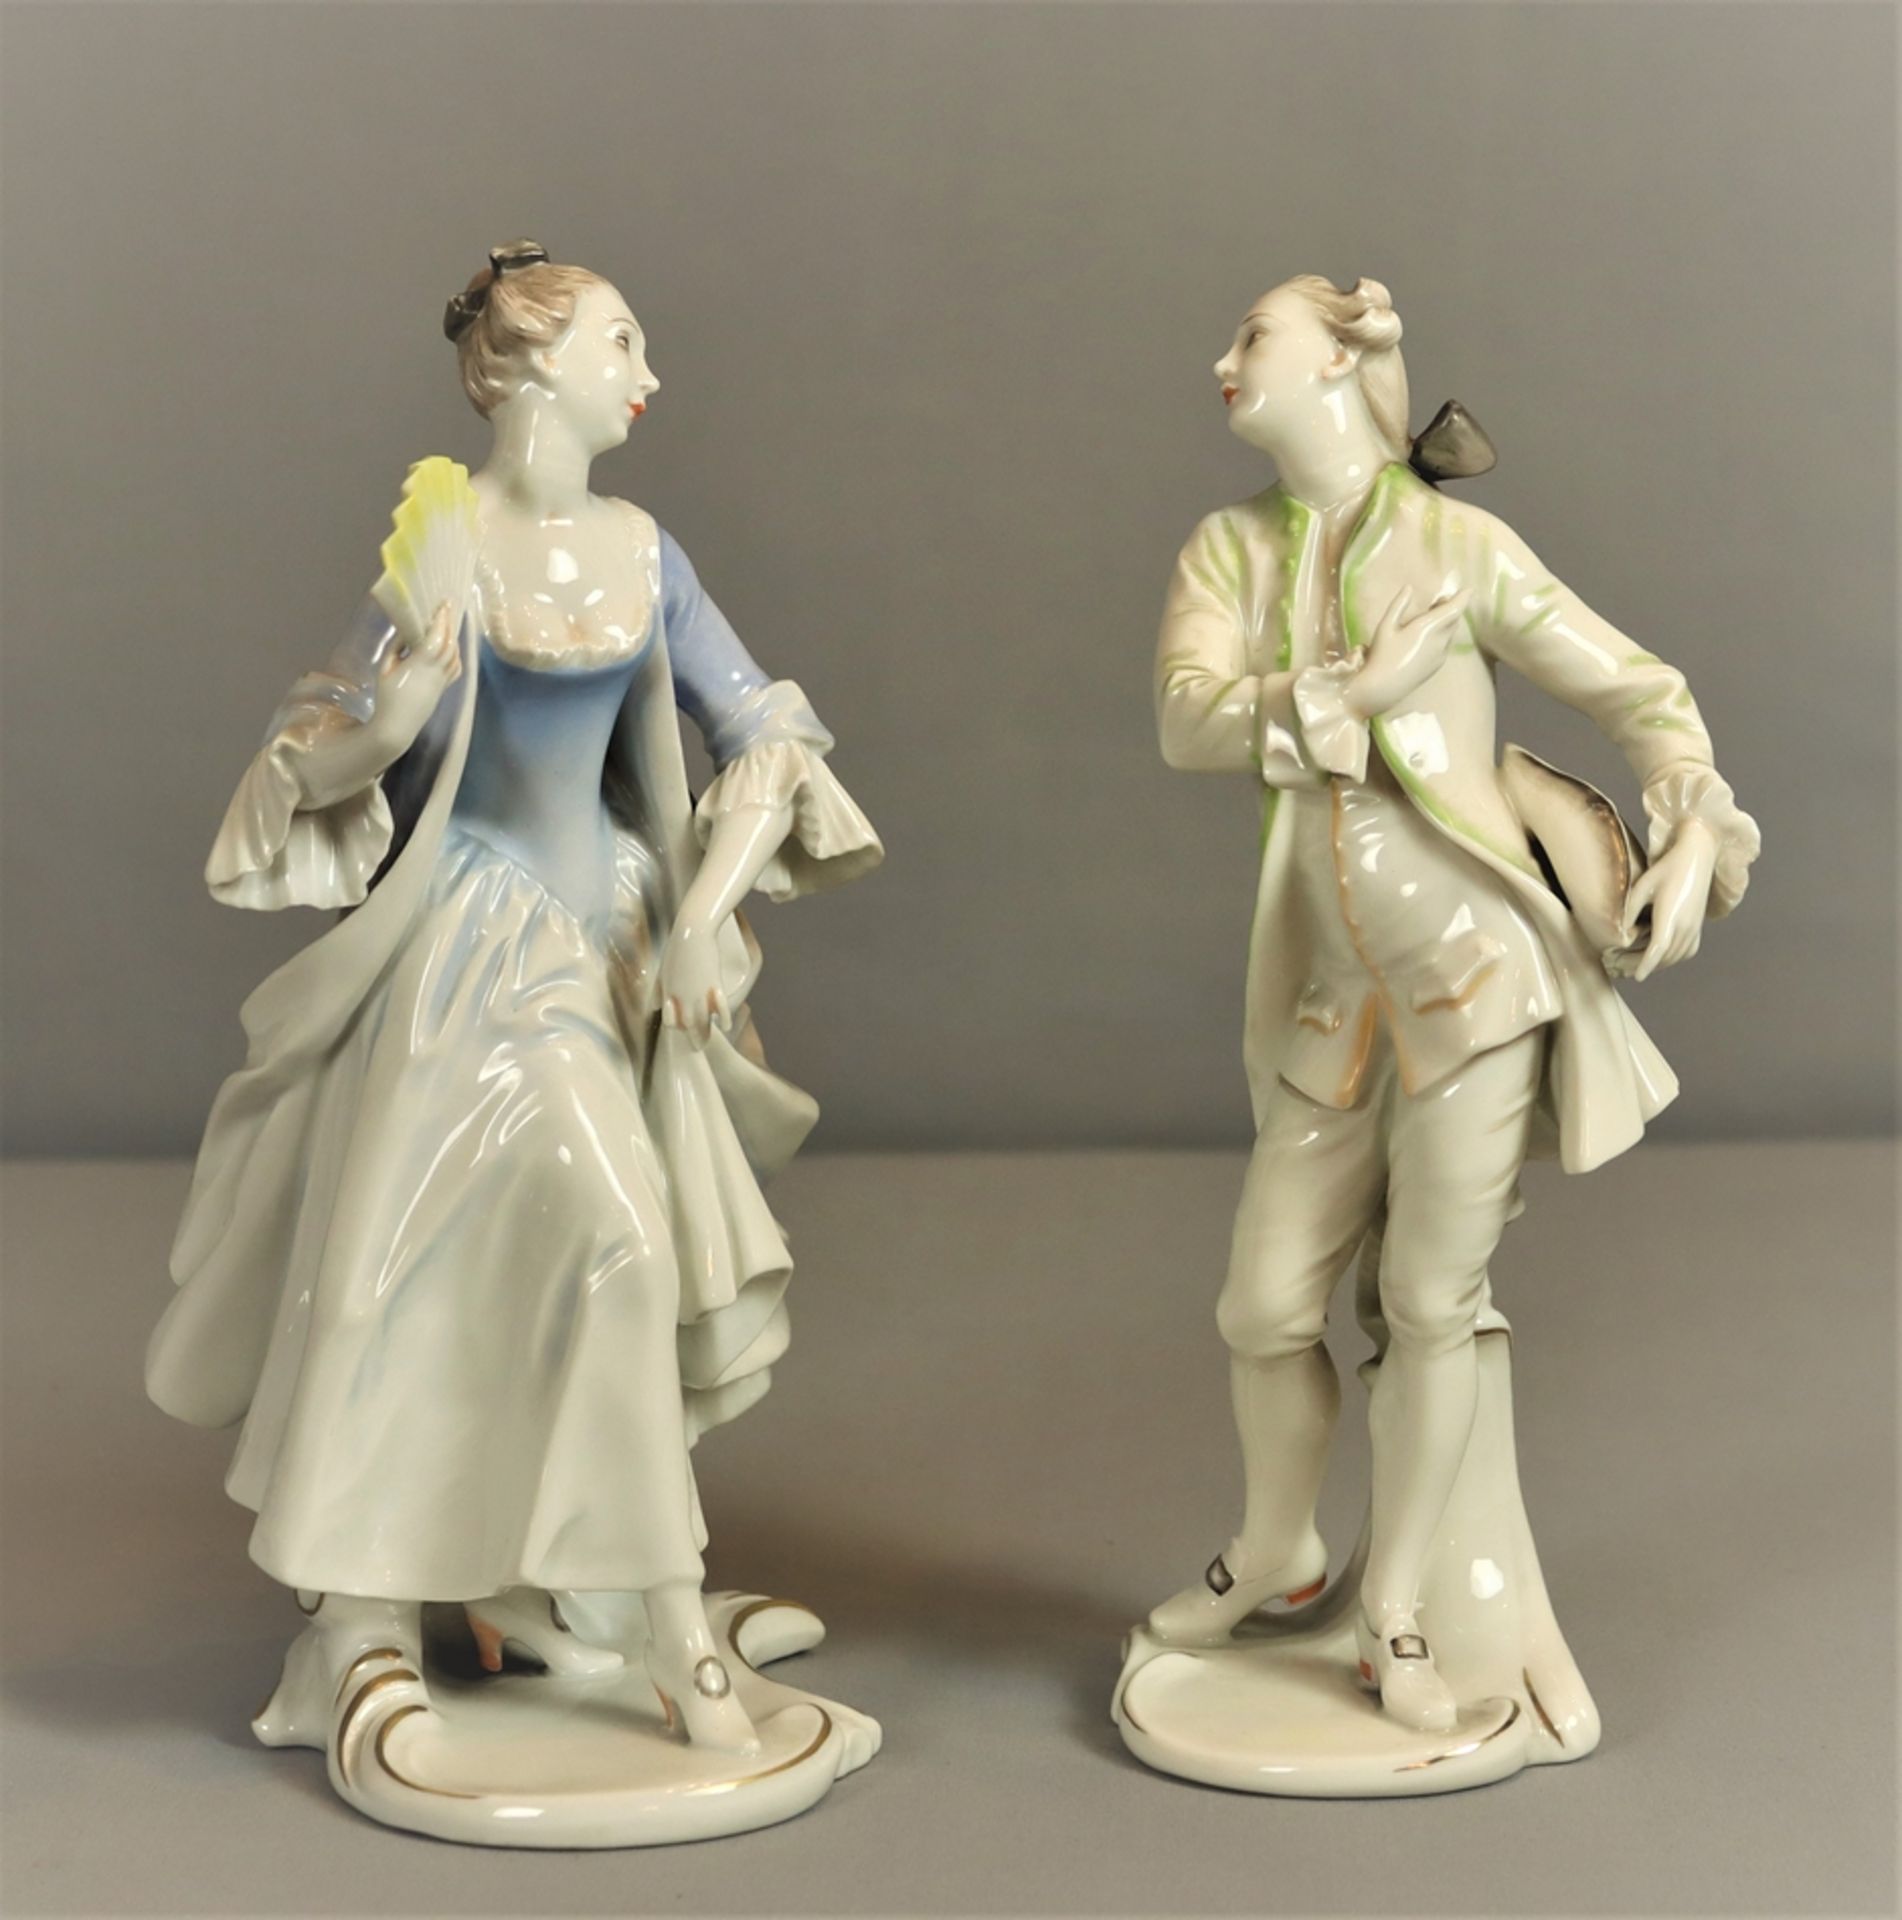 Pair of Rosenthal porcelain figures, gallant rococo couple, 20th century, German